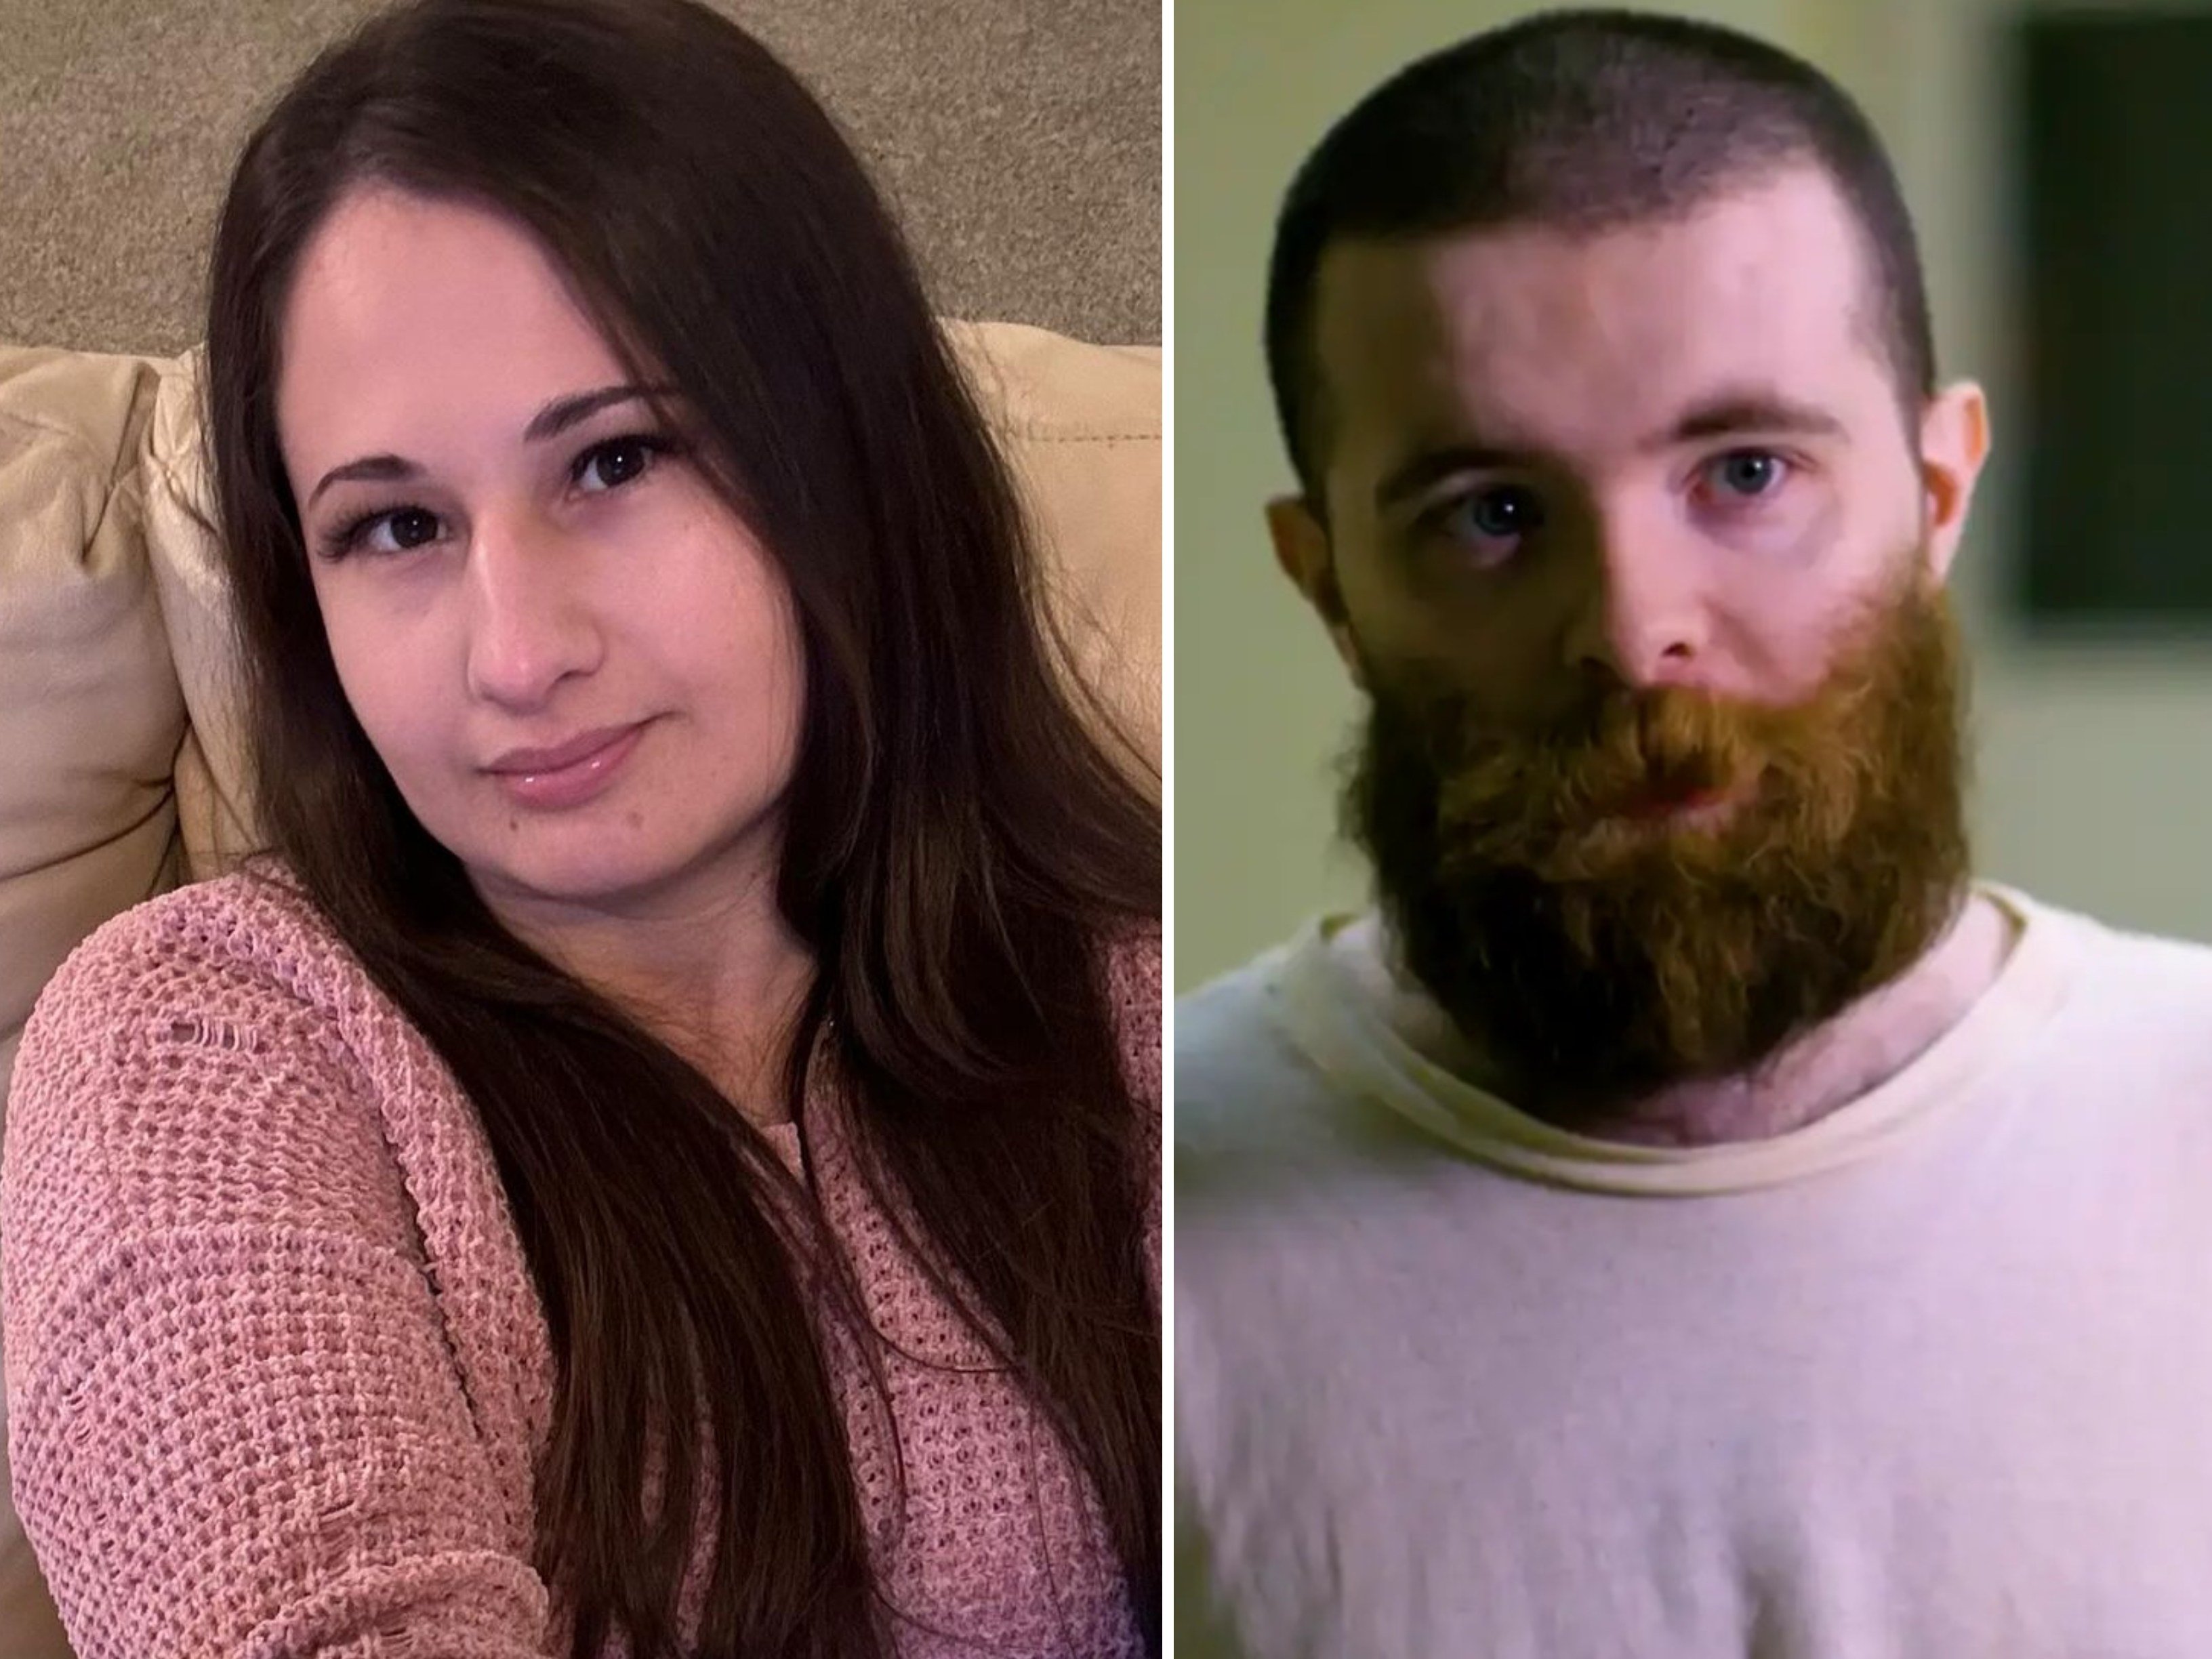 Gypsy Rose Blanchard and Nicholas Godejohn, who were arrested in 2015 for the murder of Blanchard’s mother, are no longer together. Photo: @gypsyrose_a_blanchard/Instagram, Business Insider